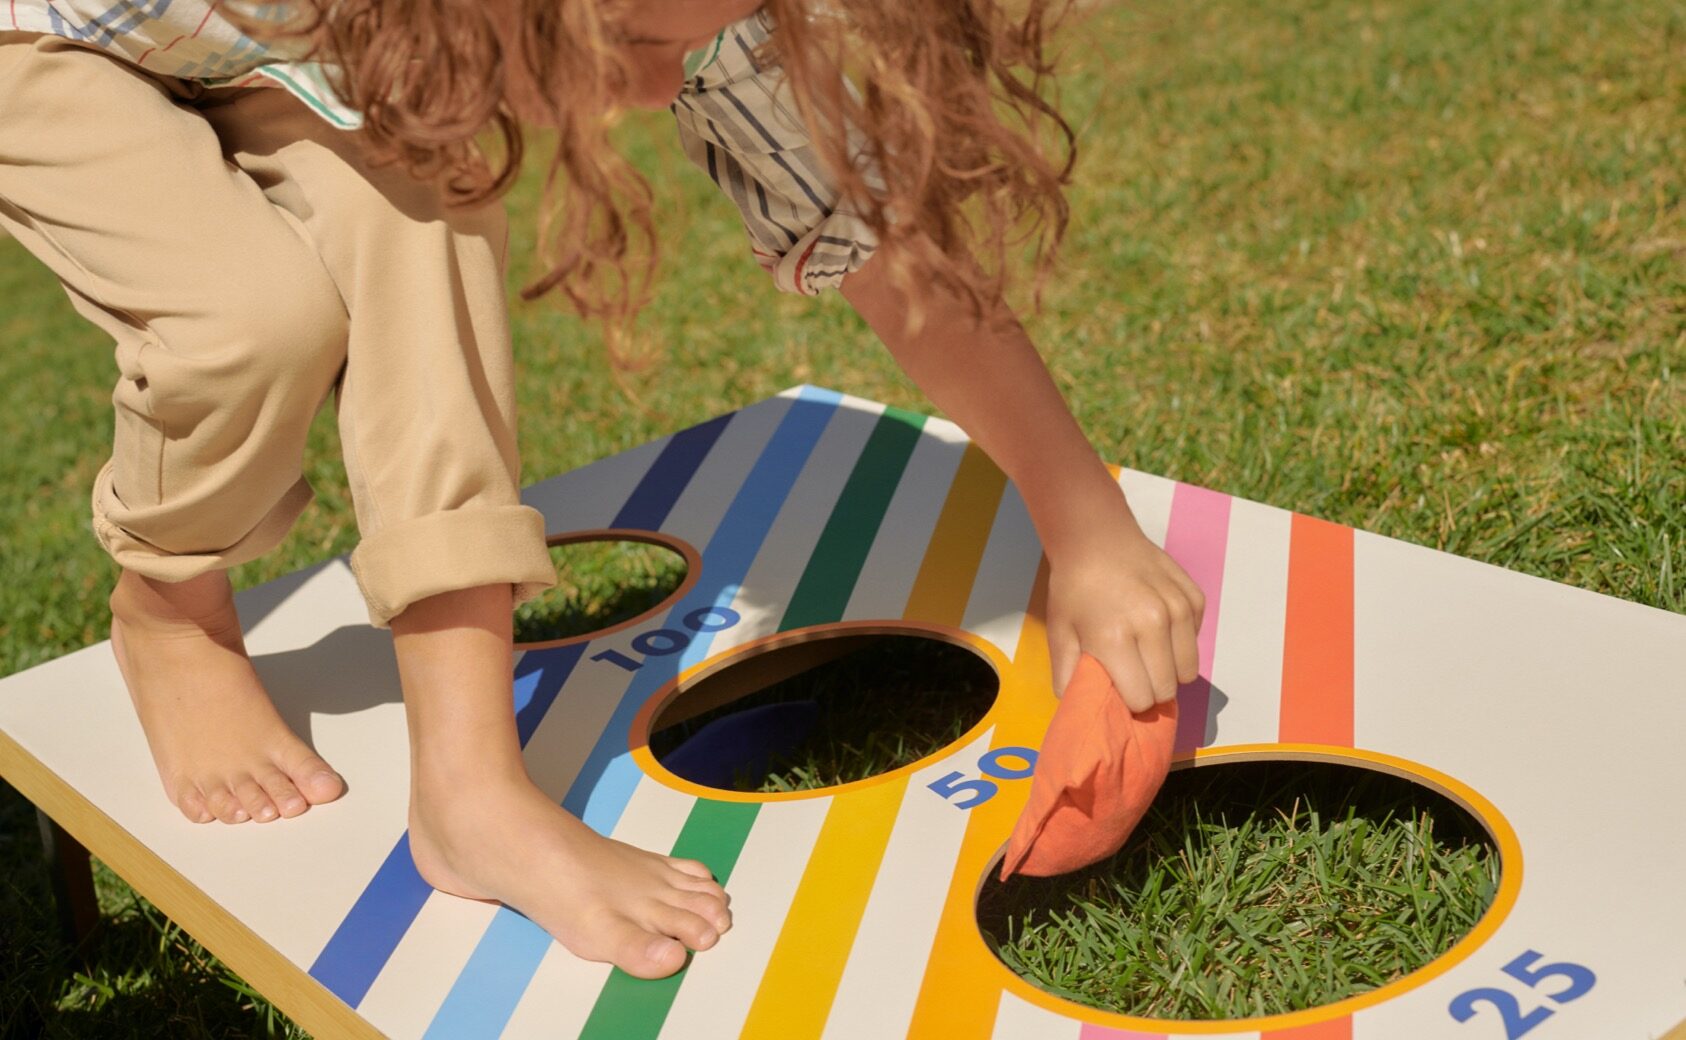 Our favourite backyard games including ring toss and paddle ball.